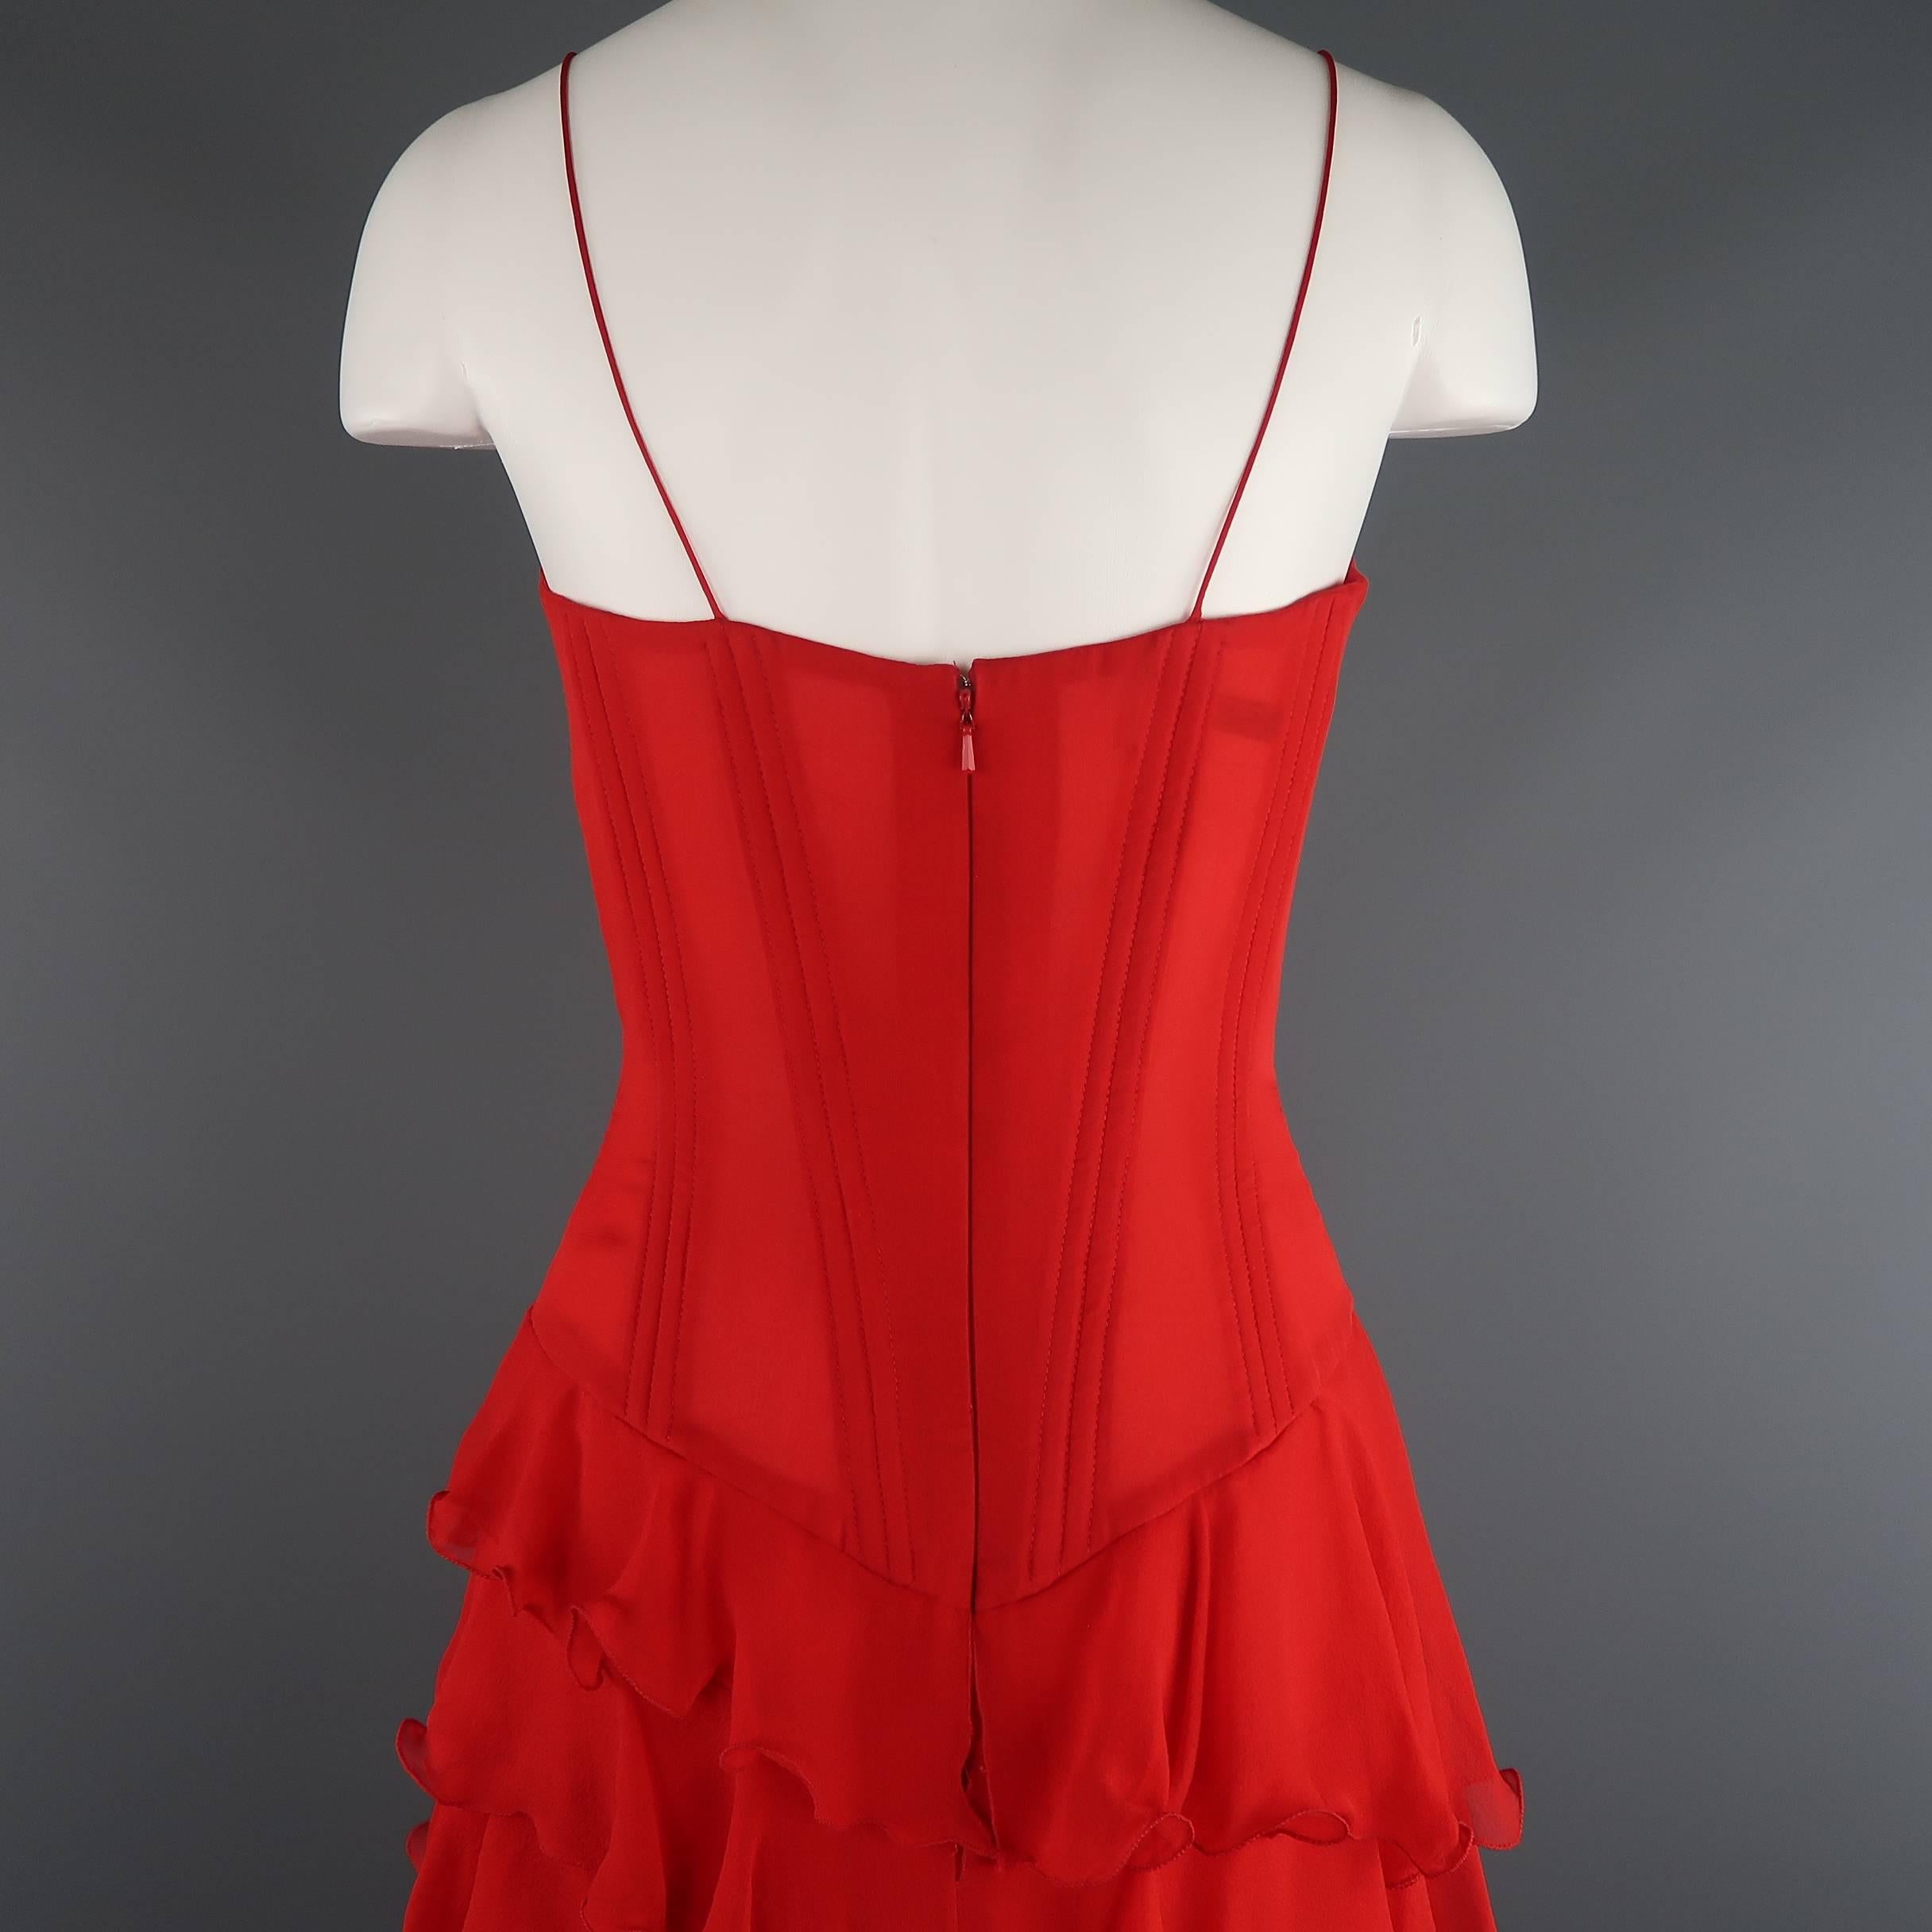 Vicky Tiel Couture Dress - Red Silk Chiffon Asymmetrical Ruffle Corset Cocktail 5